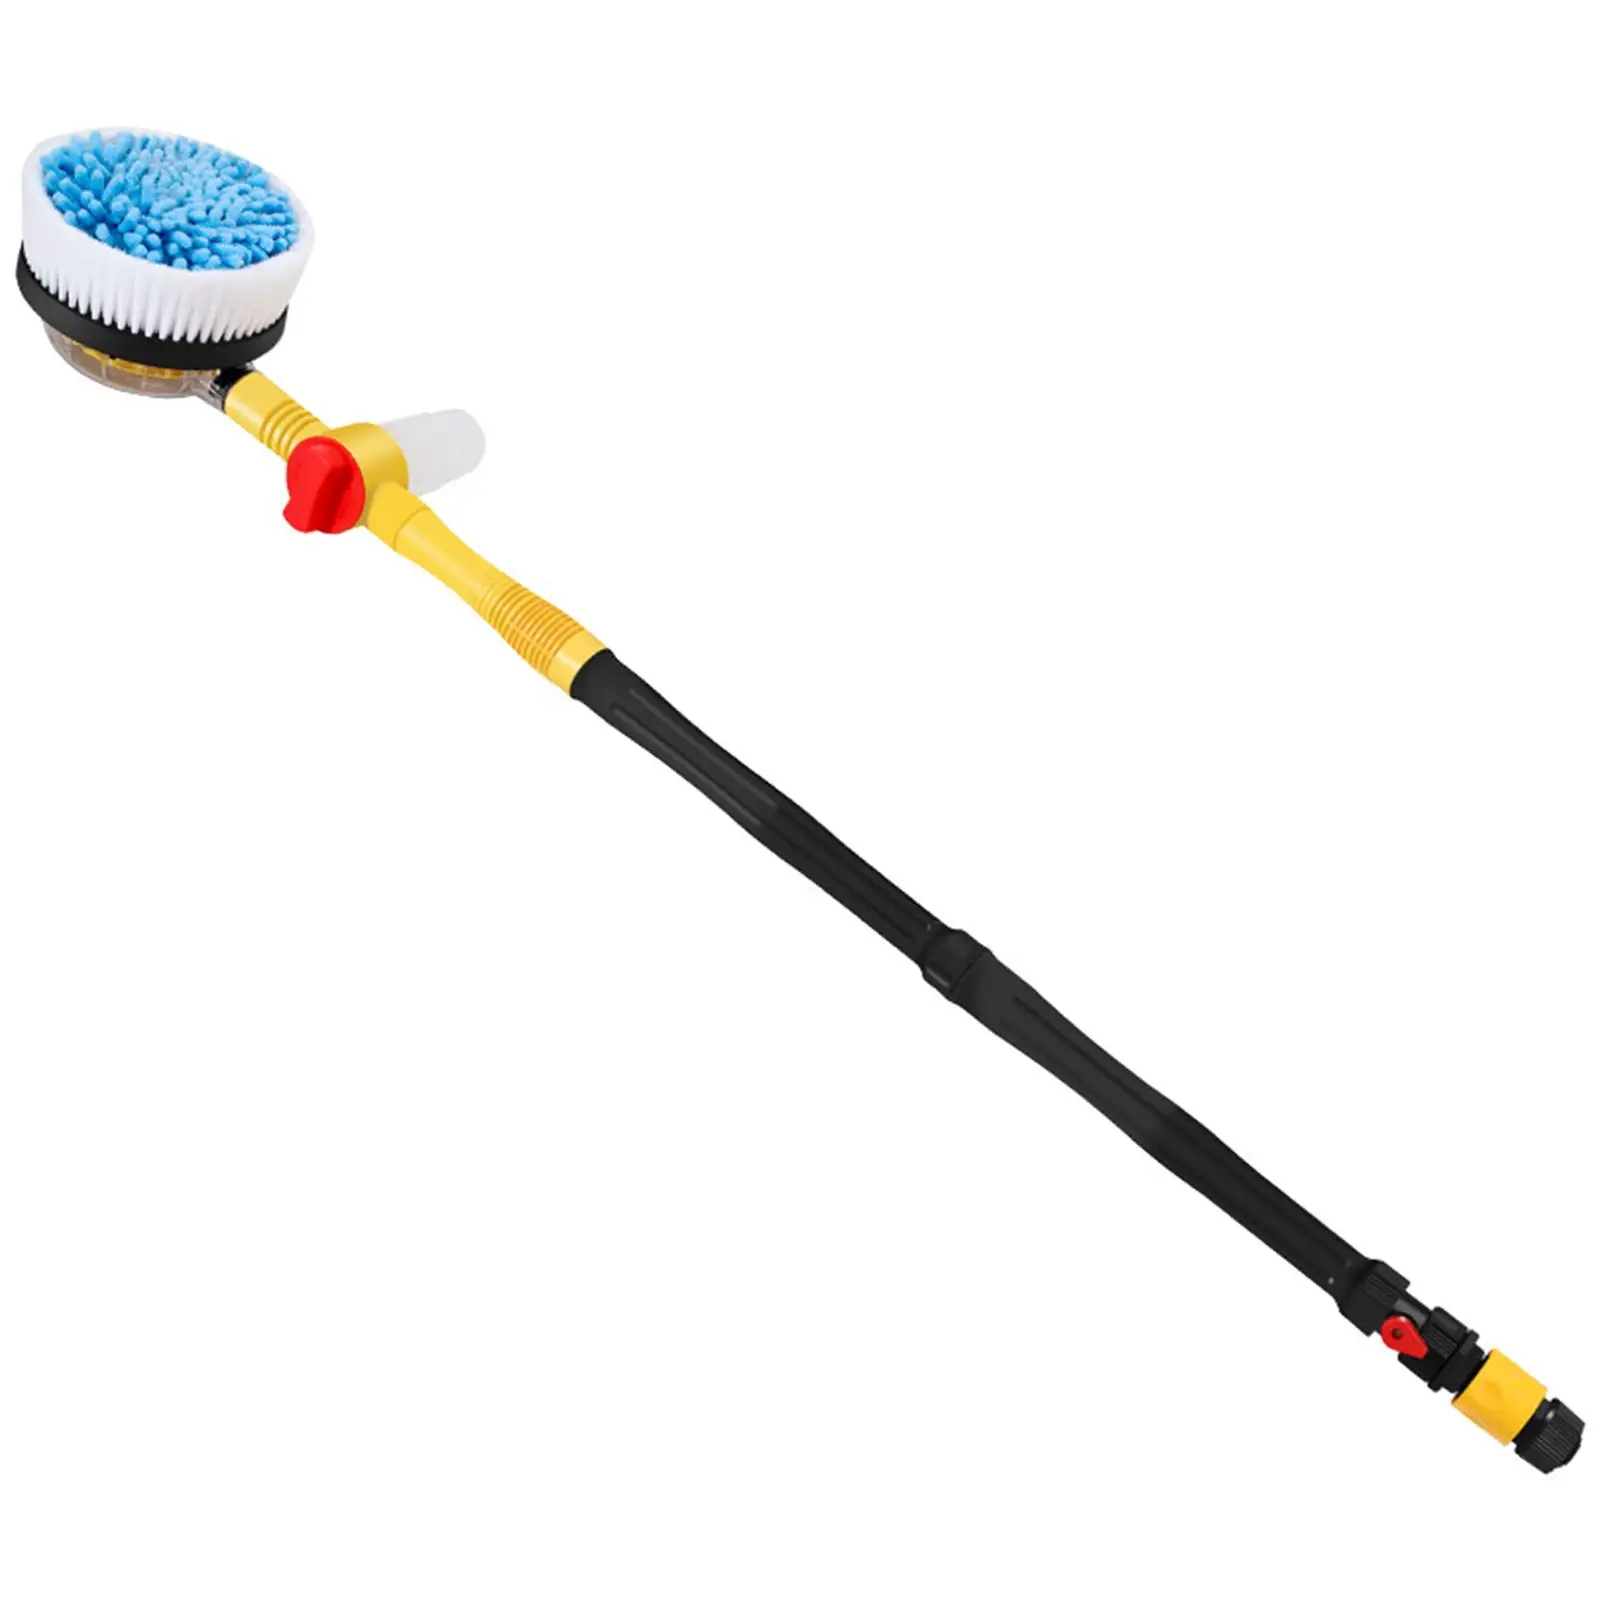 Car Rotary Wash Brush Kit High Pressure Washer Fit for Vehicle Cleaning